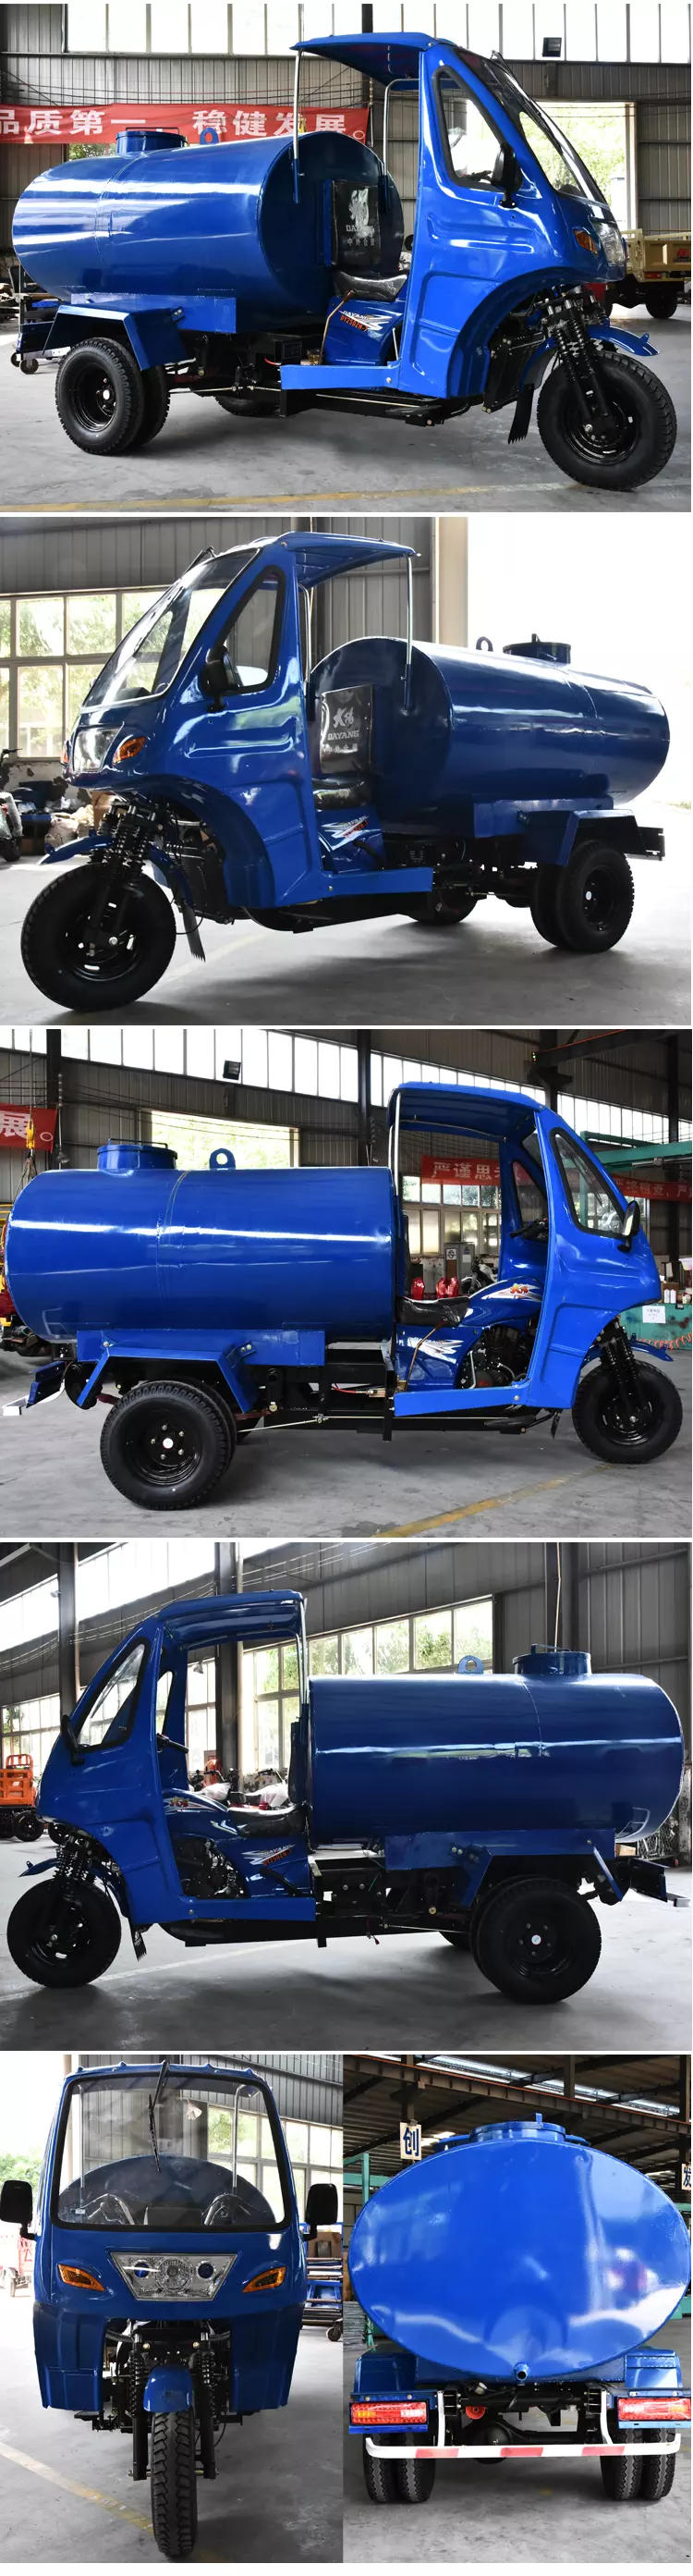 2019 New factory Top quality Oil tank water delivery tricycle motorcycle motorized rickshaw tricycle with water tank